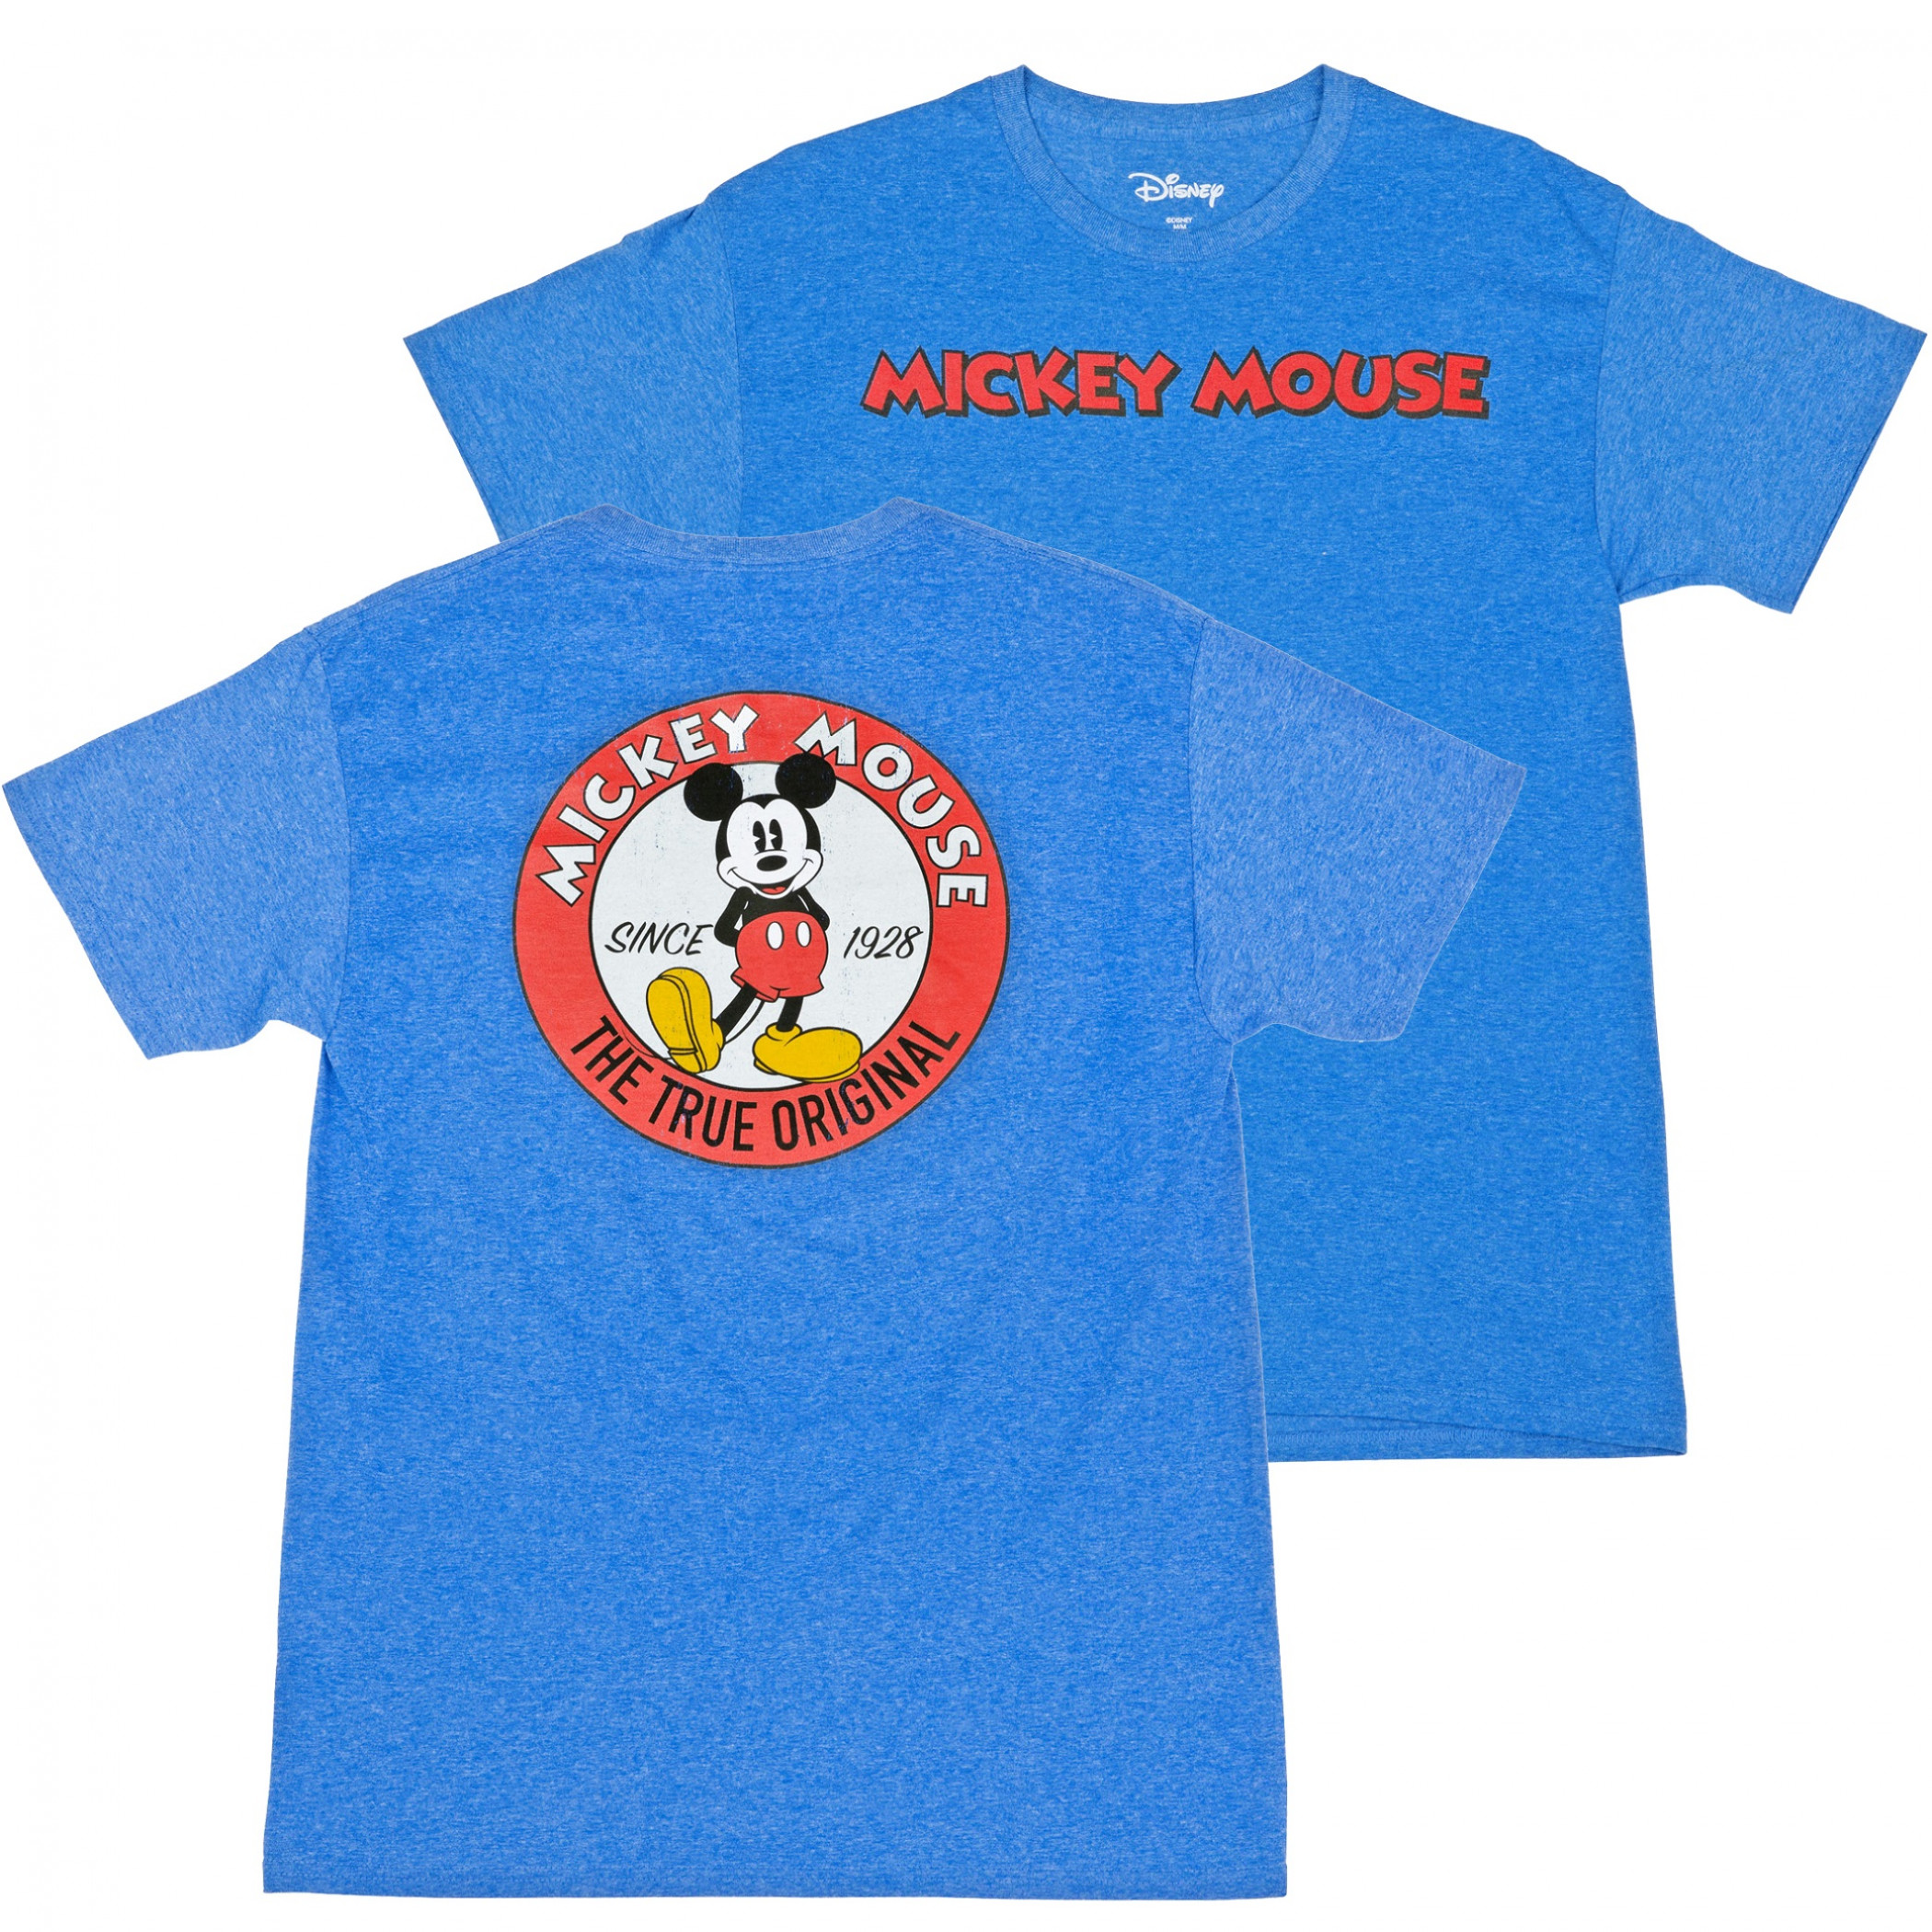 Disney T-Shirt for Adults - Mickey Mouse 1928 - Black